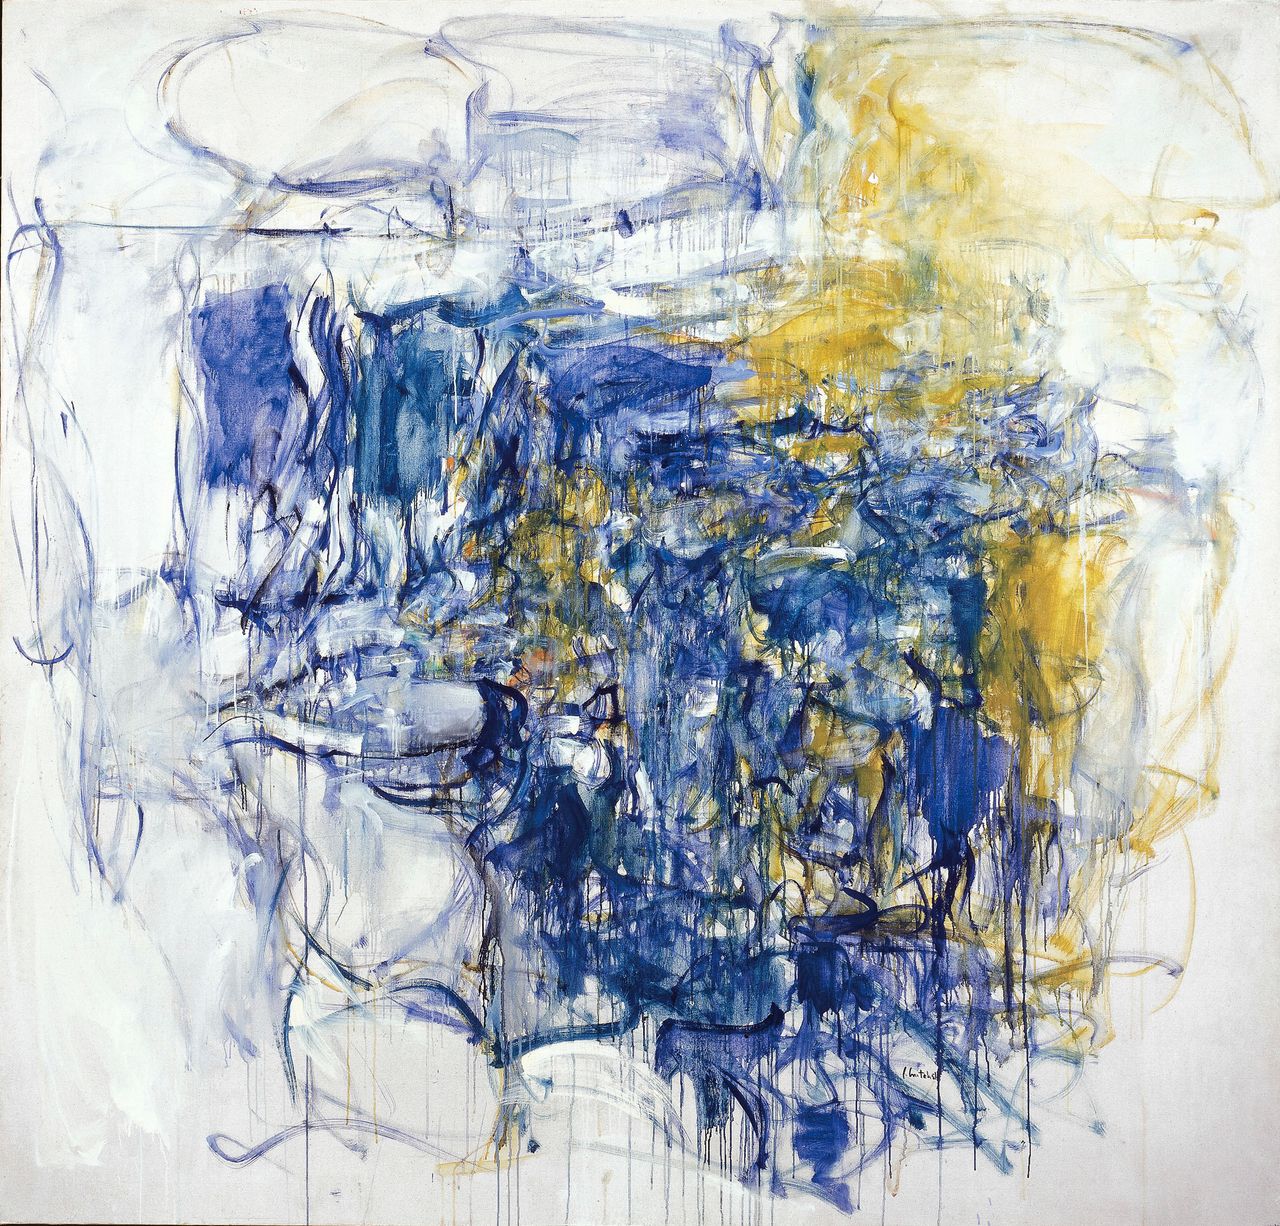 Joan Mitchell, "Hudson River Day Line," 1955